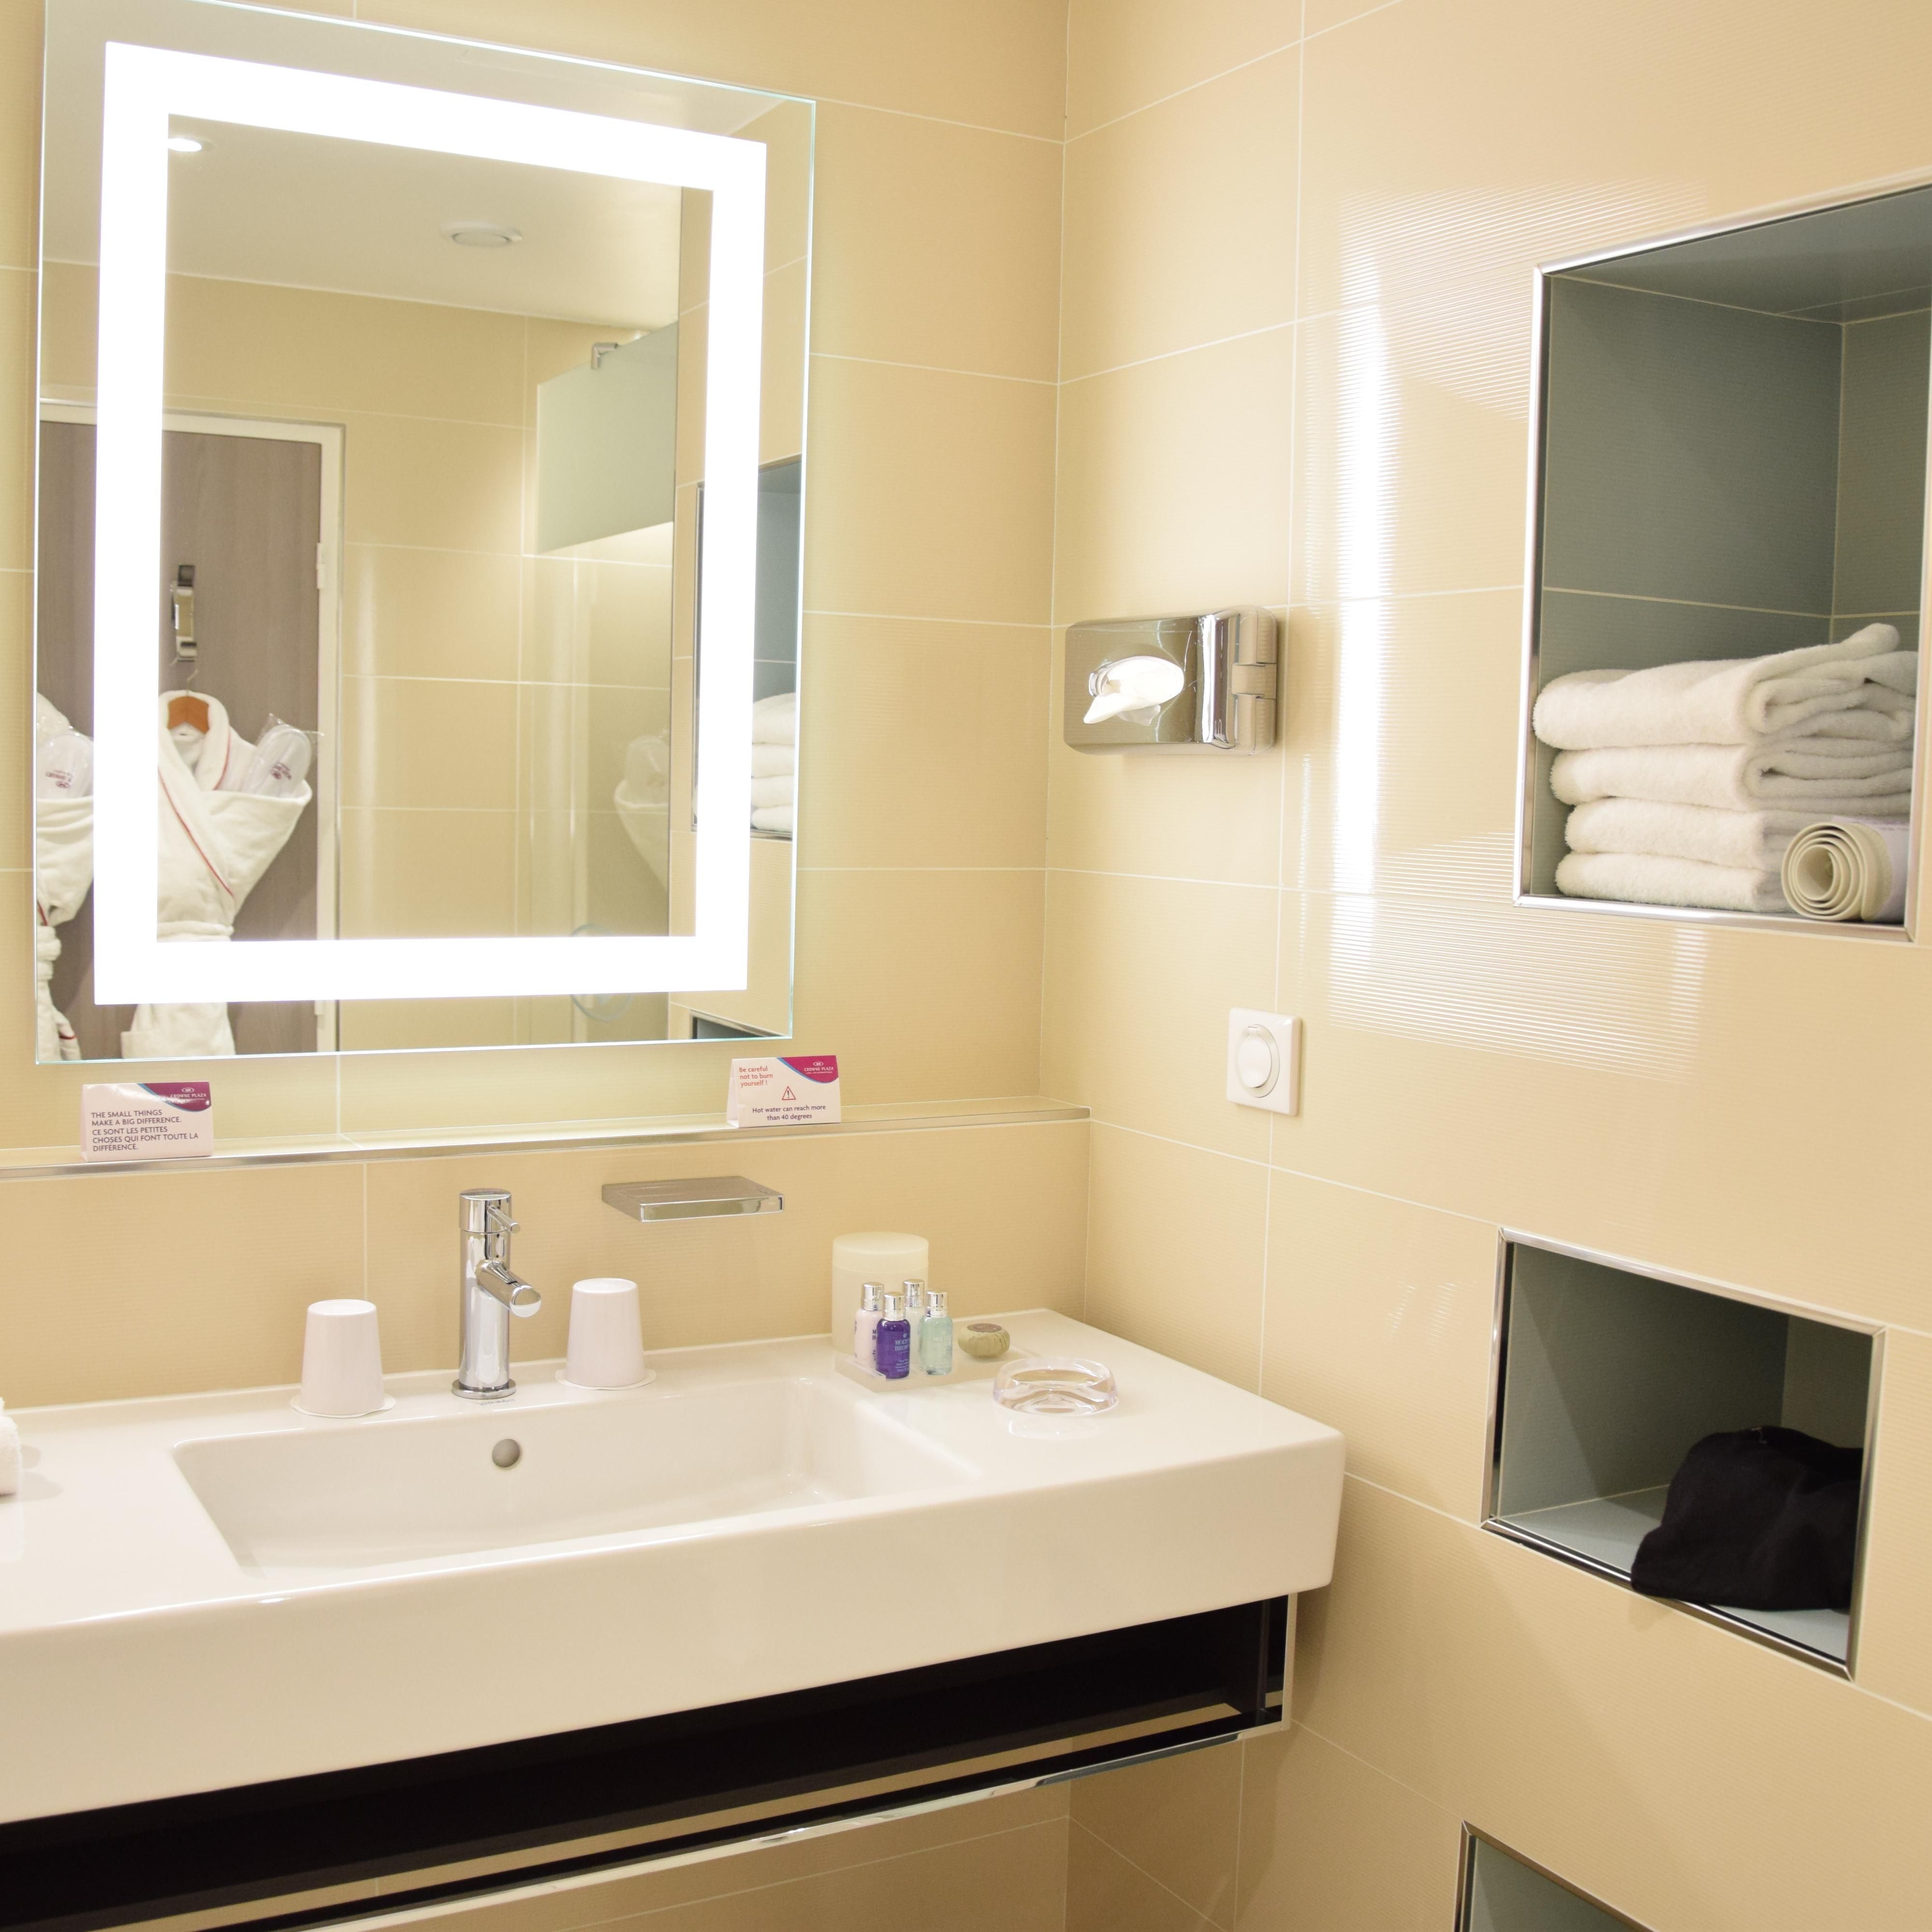 Bathroom fully equiped with welcome amenities